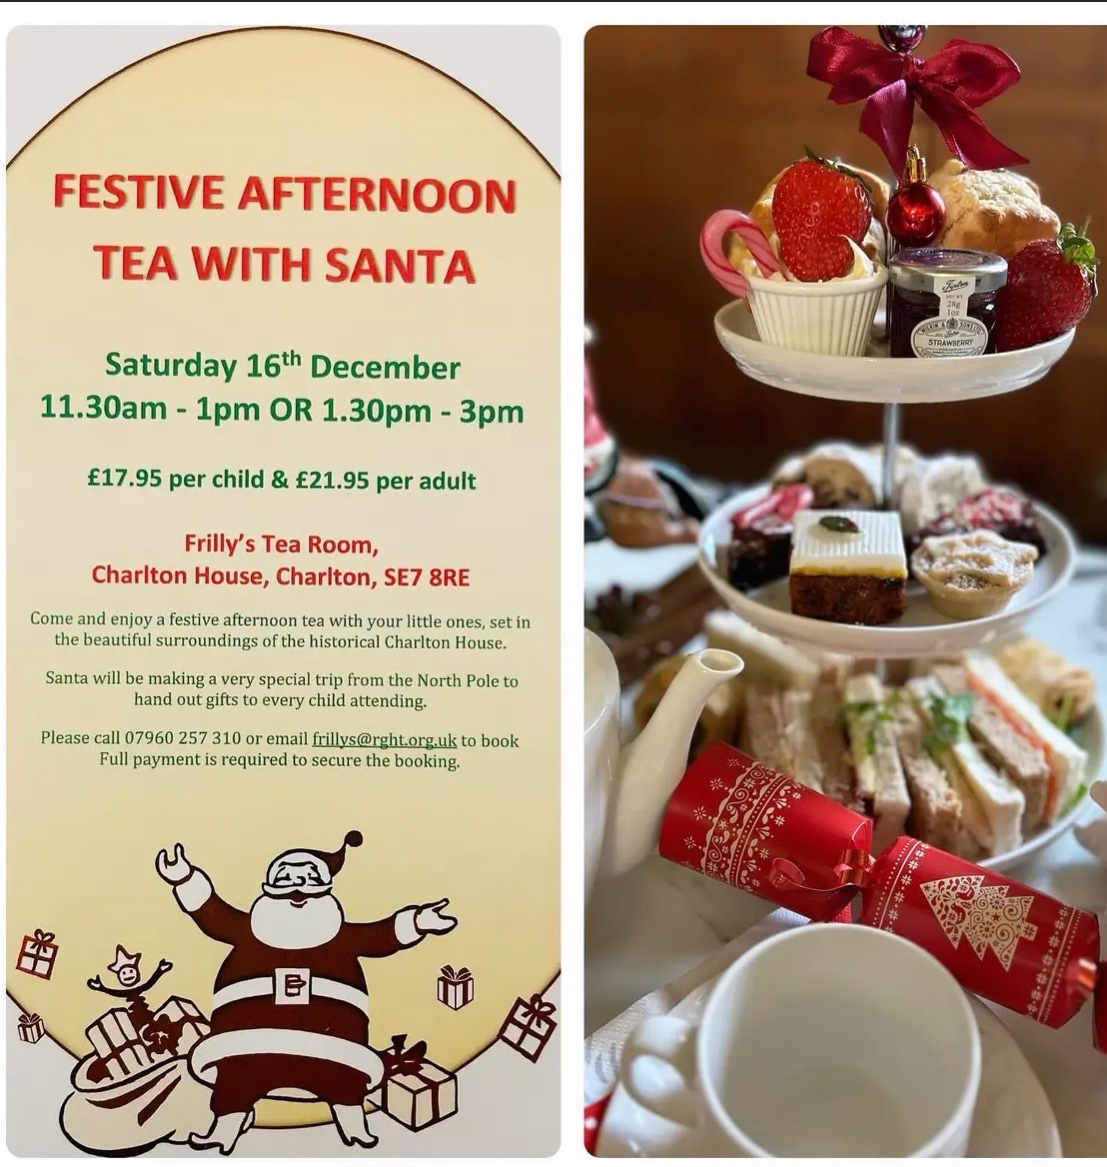 📣 There are lots of Christmassy things coming up @CharltonHouseGW 📆2nd Dec 👉 A Christmas Market 🎁🎅 📆 9th Dec 👉 A festive immersive theatre for the kids 🎭🎅 📆 14th Dec 👉 Poetry & Music evening 📚🎶 📆 16th Dec 👉 Festive Afternoon Tea 🫖 🧁